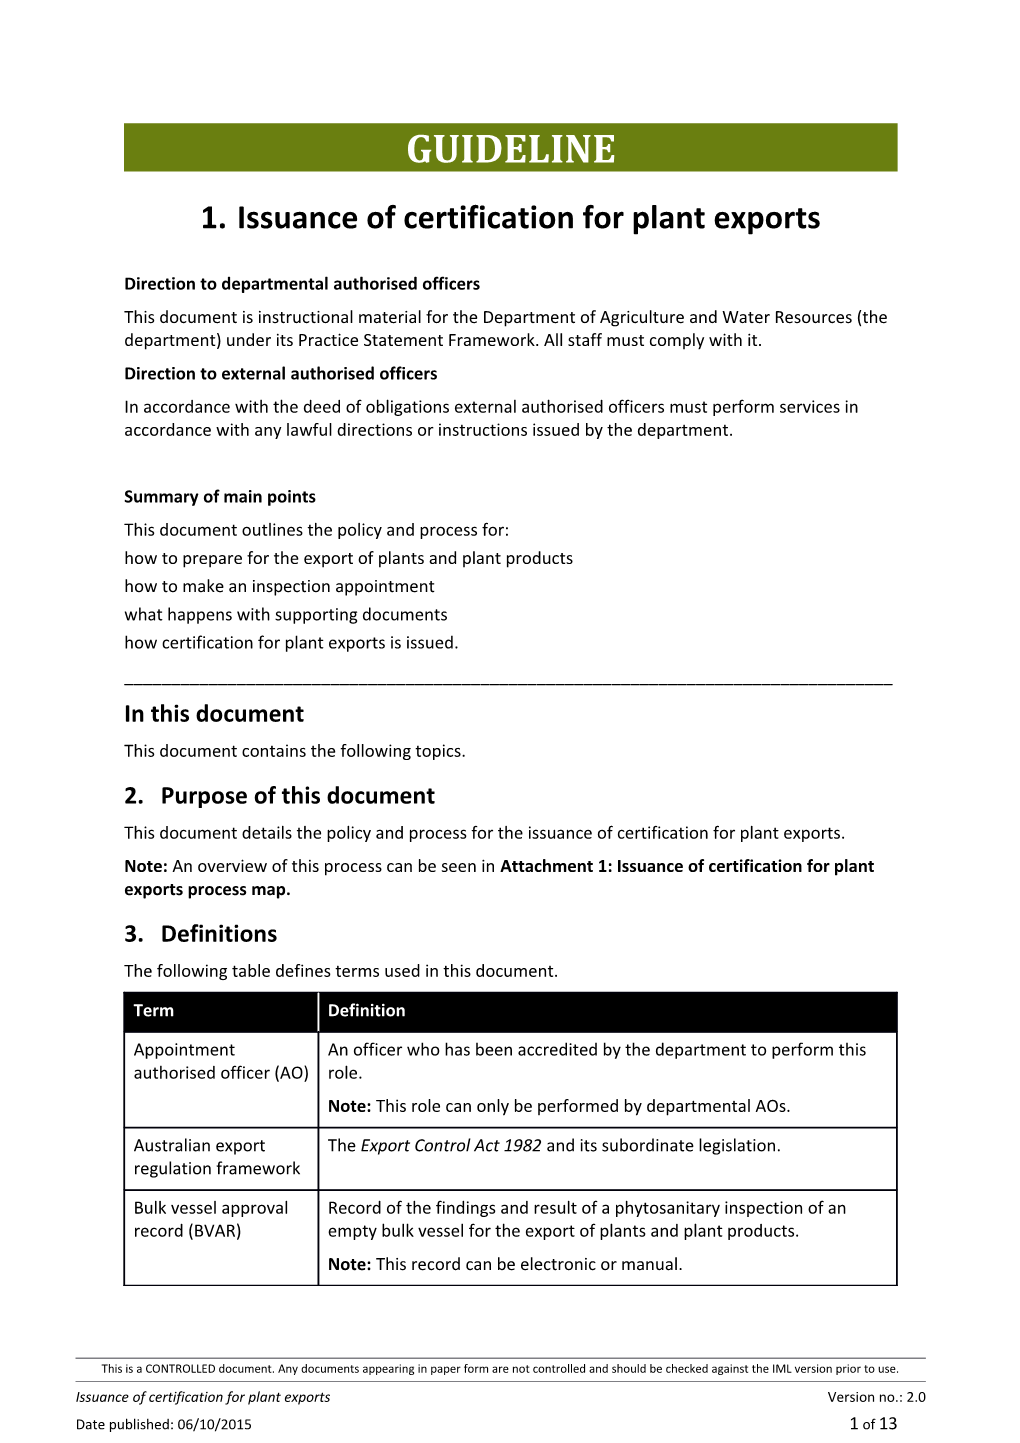 Issuance of Certification for Plant Exports